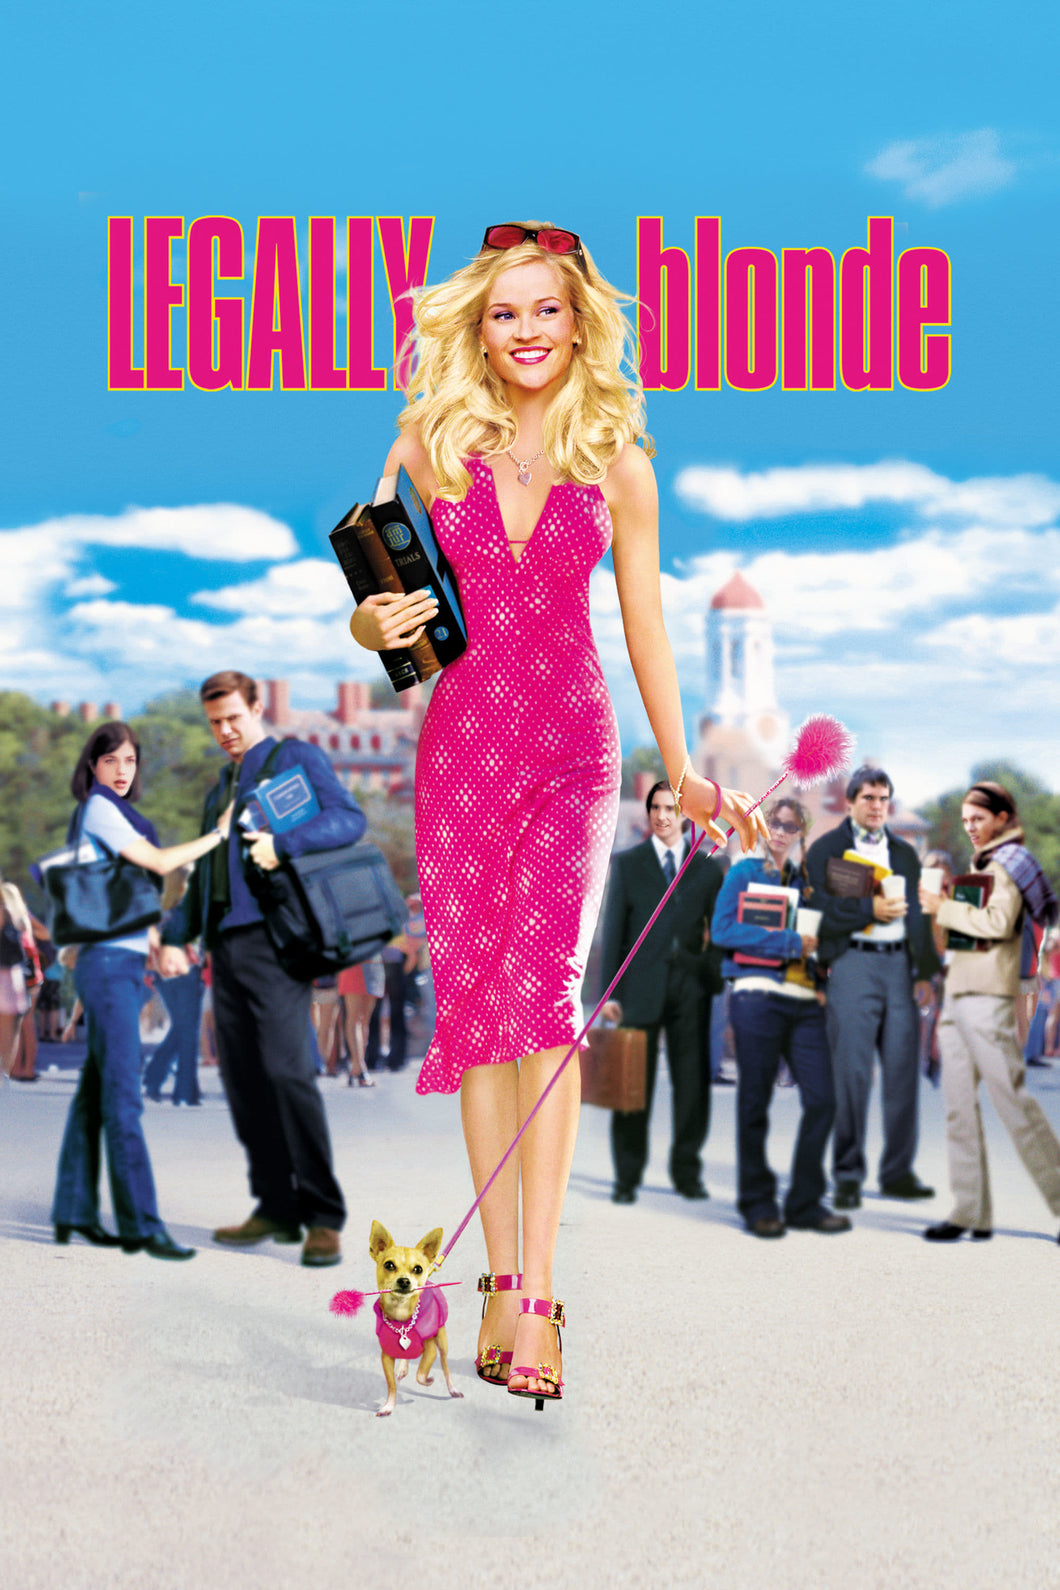 Legally Blonde (2001) Movie Poster Framed or Unframed Glossy Poster Free UK Shipping!!!